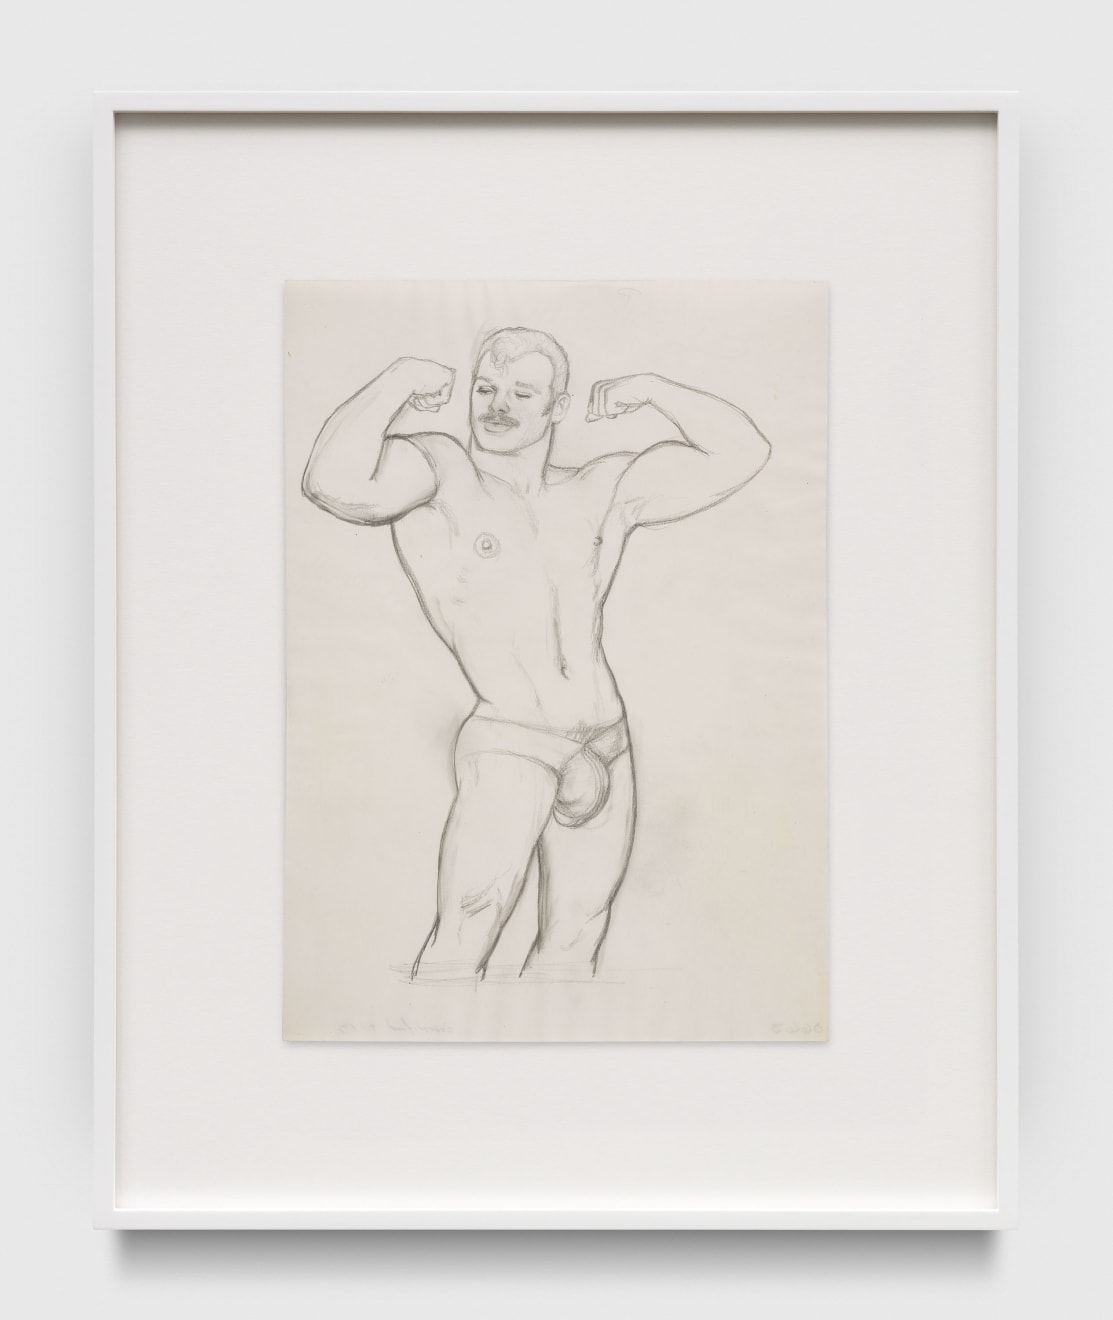 Tom of Finland, Untitled (Preparatory Drawing), 1984